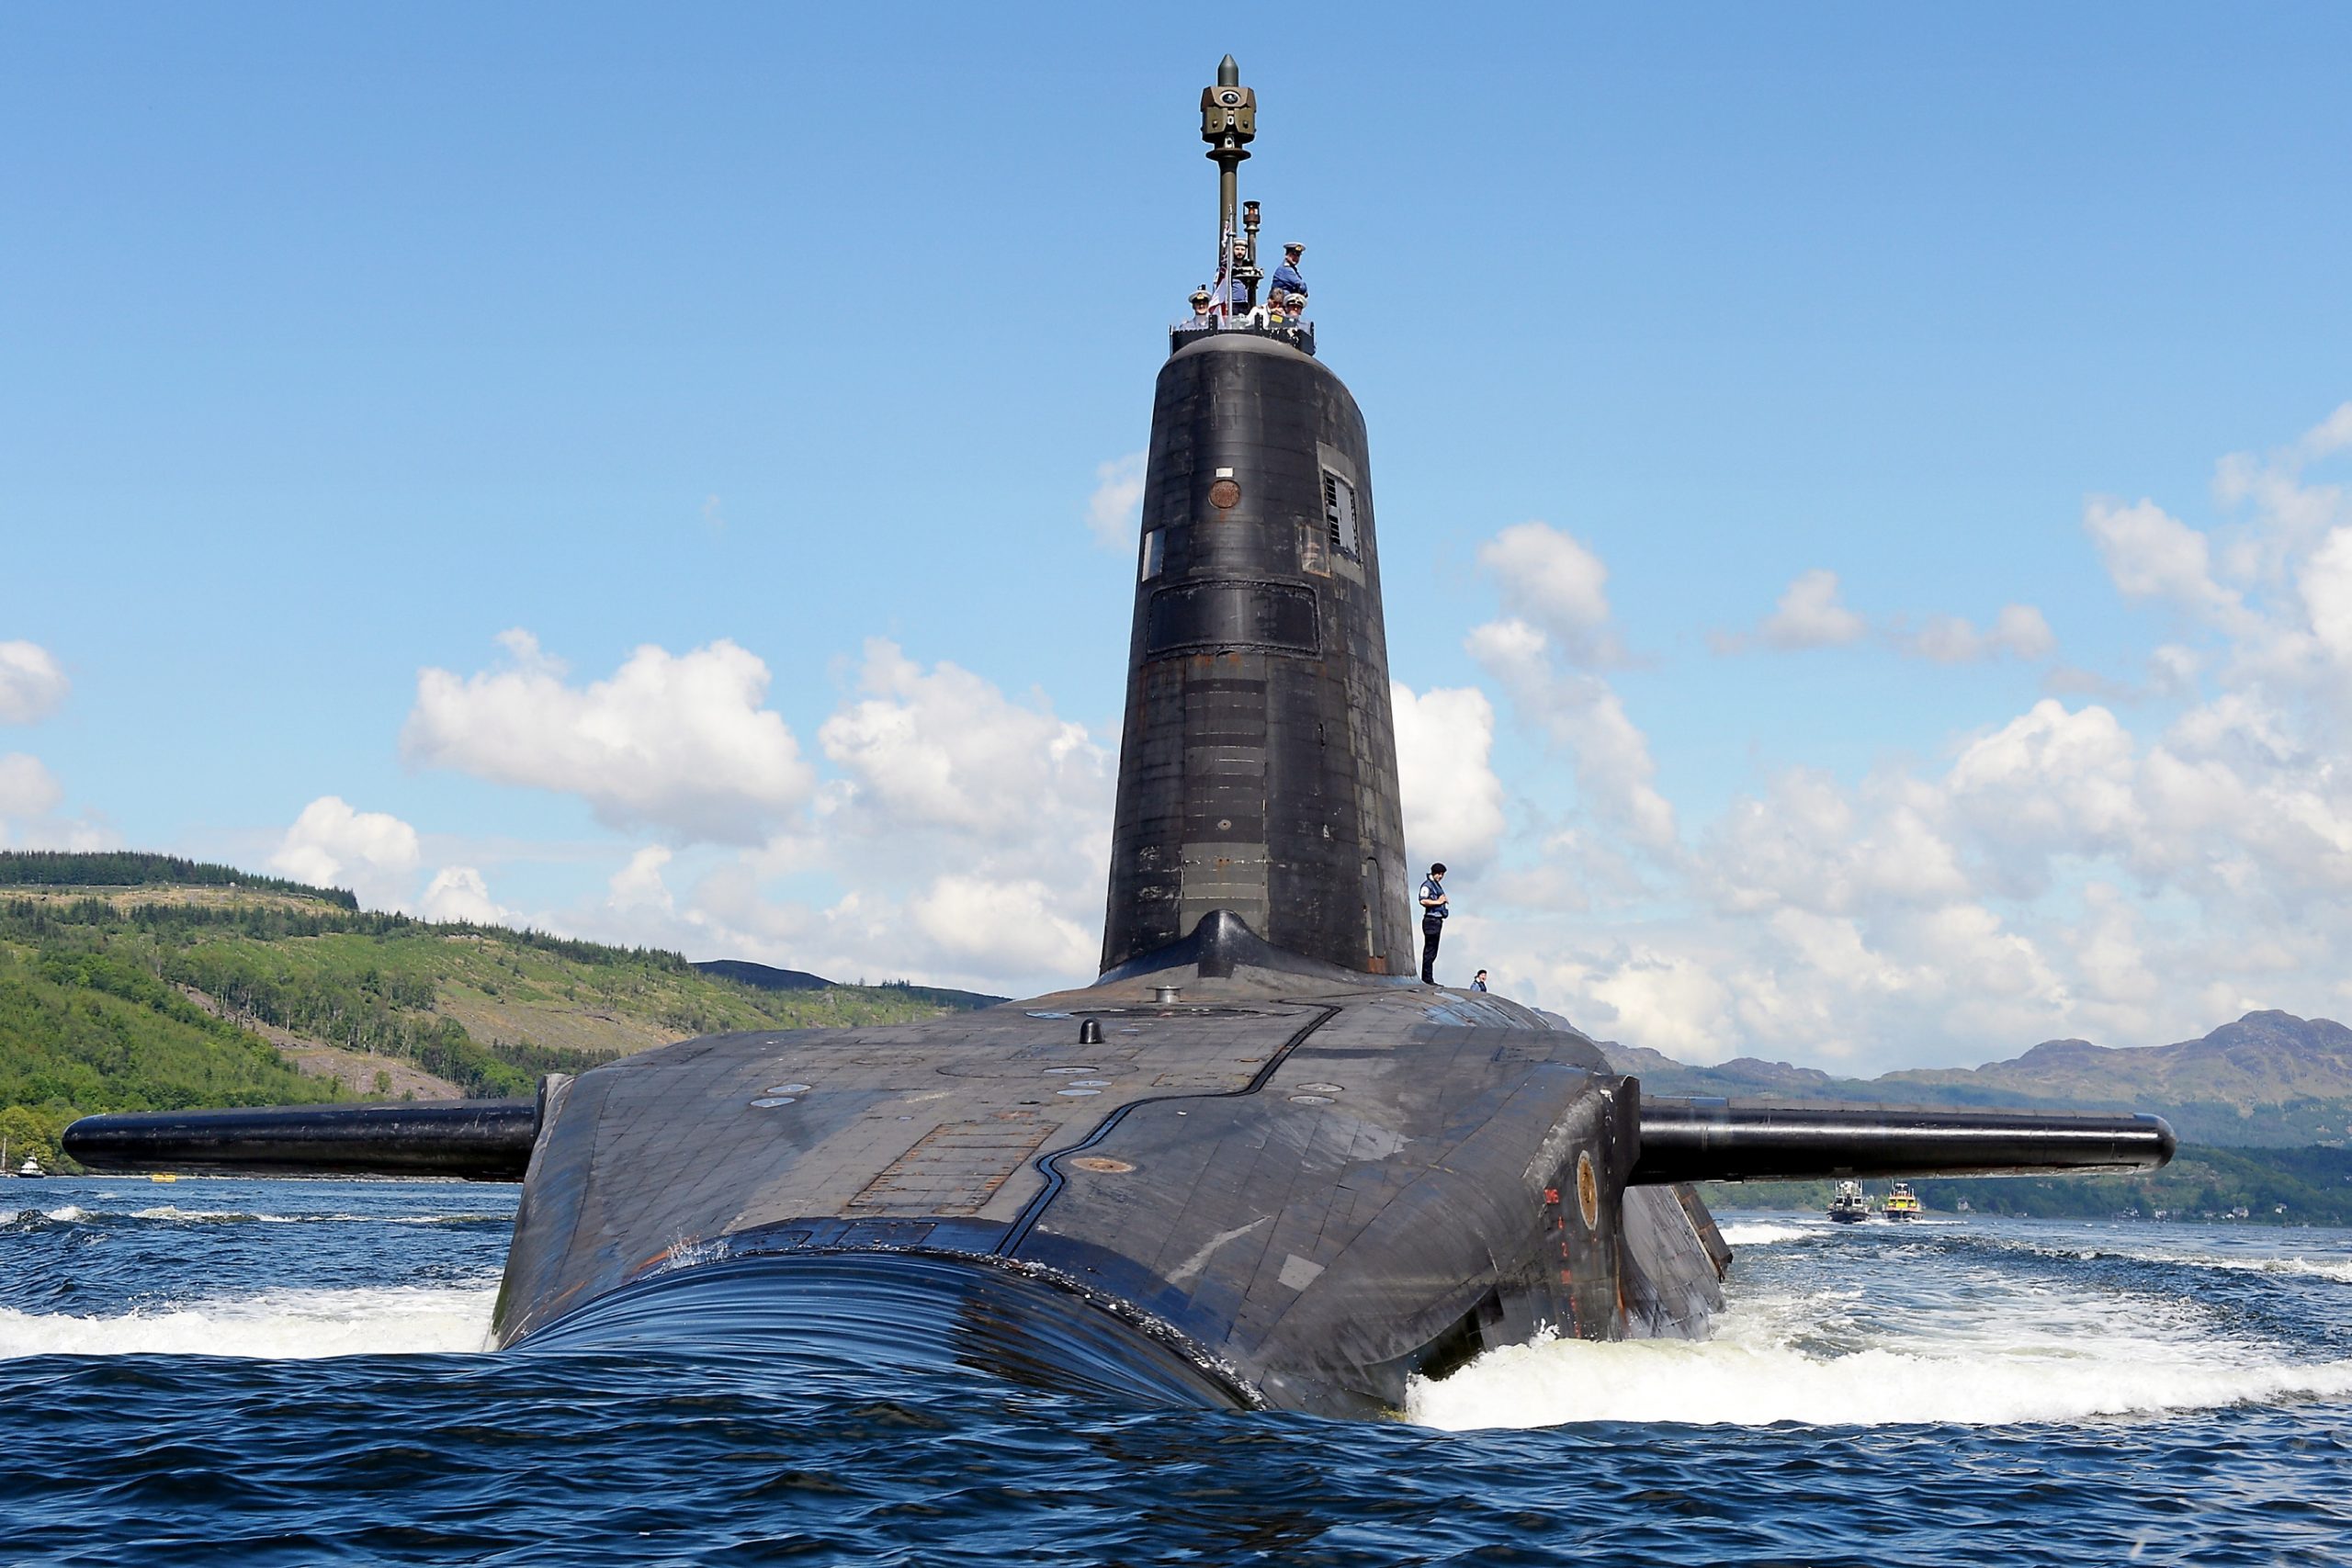 Submarine Modernisation Supporting More Than 1,000 Jobs